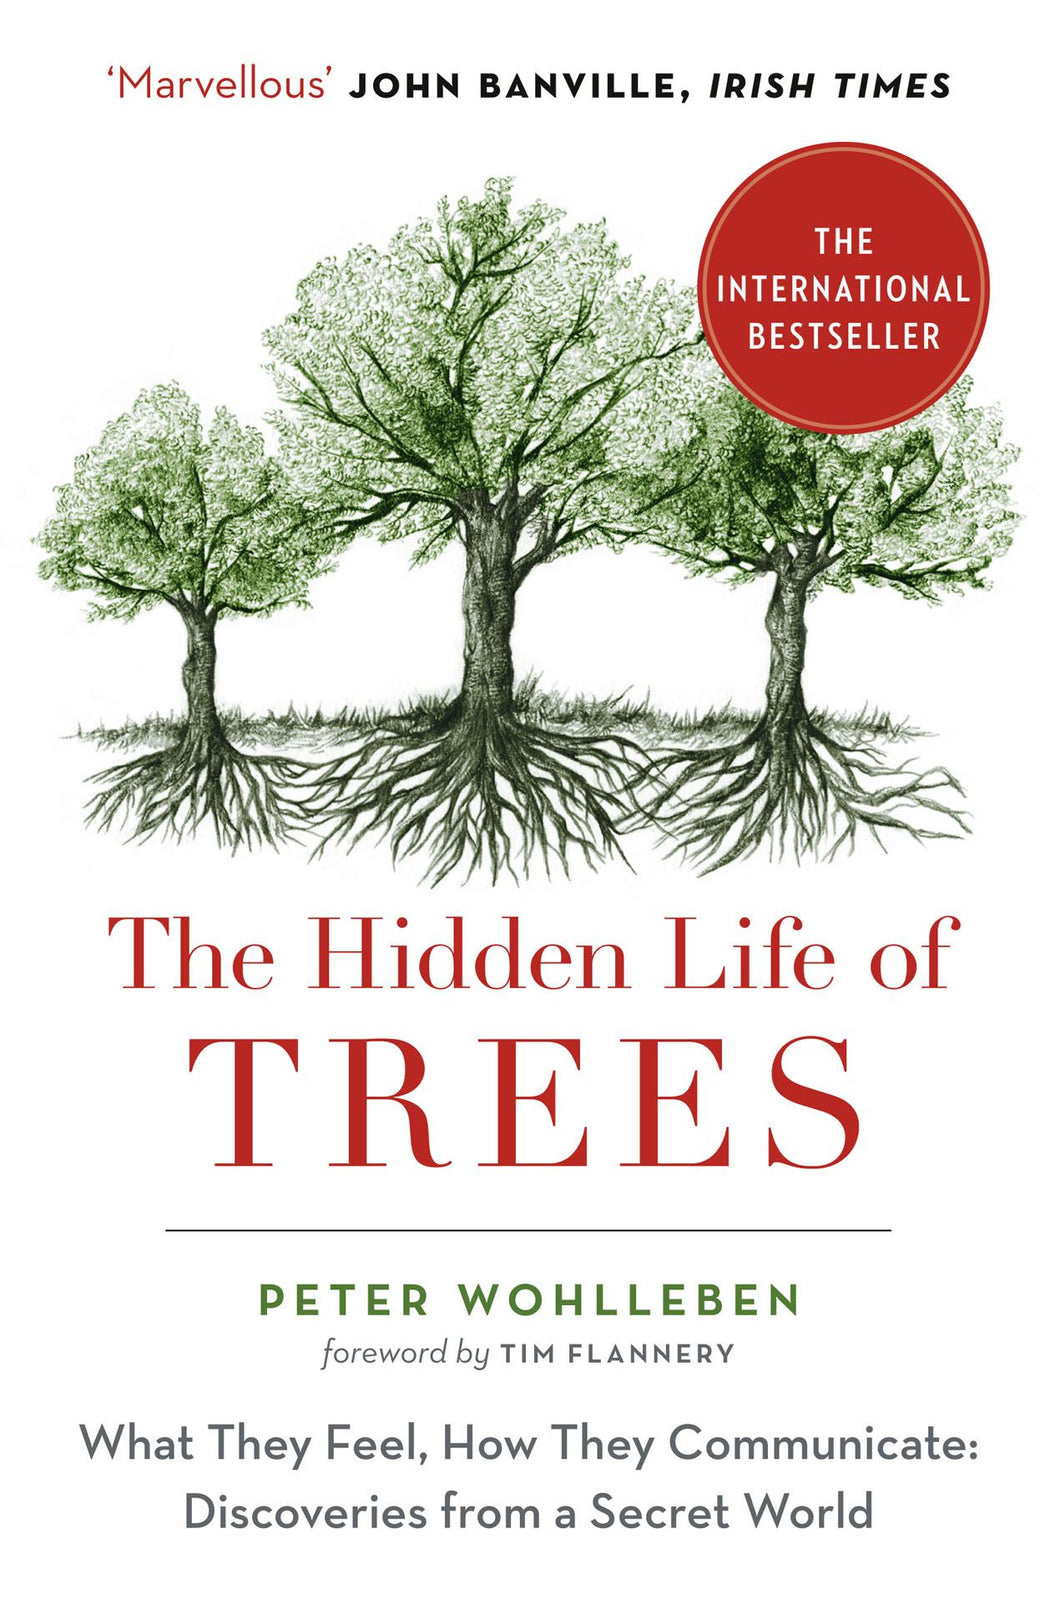 The Hidden Life of Trees by Peter Wohlleben